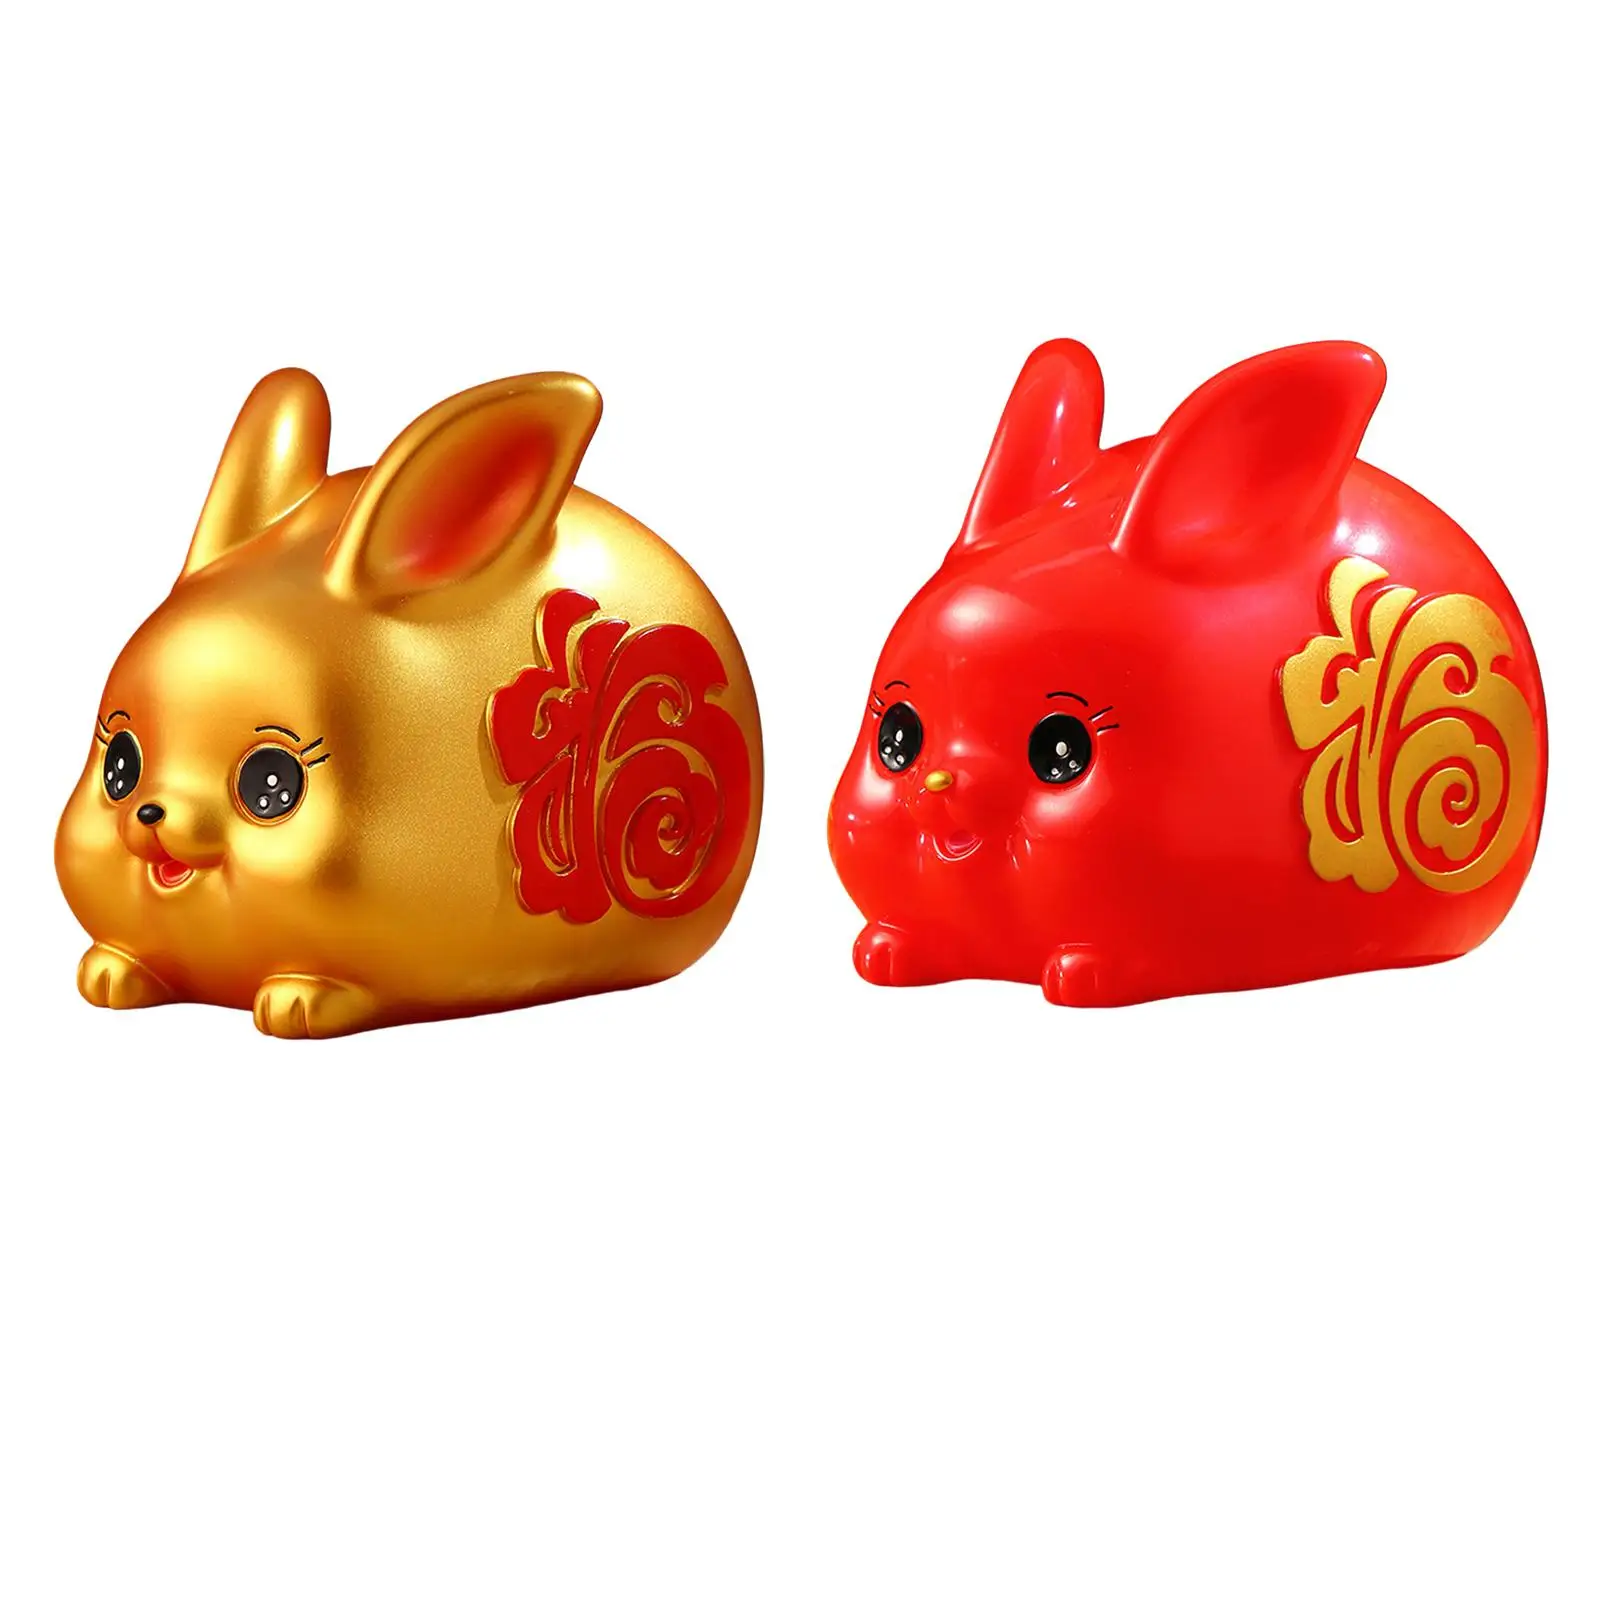 Chinese Style Lucky Rabbit Money Bank Bunny Figurines Money Saving Pot Jar Sculpture for Home Decoration Household Boys Adults